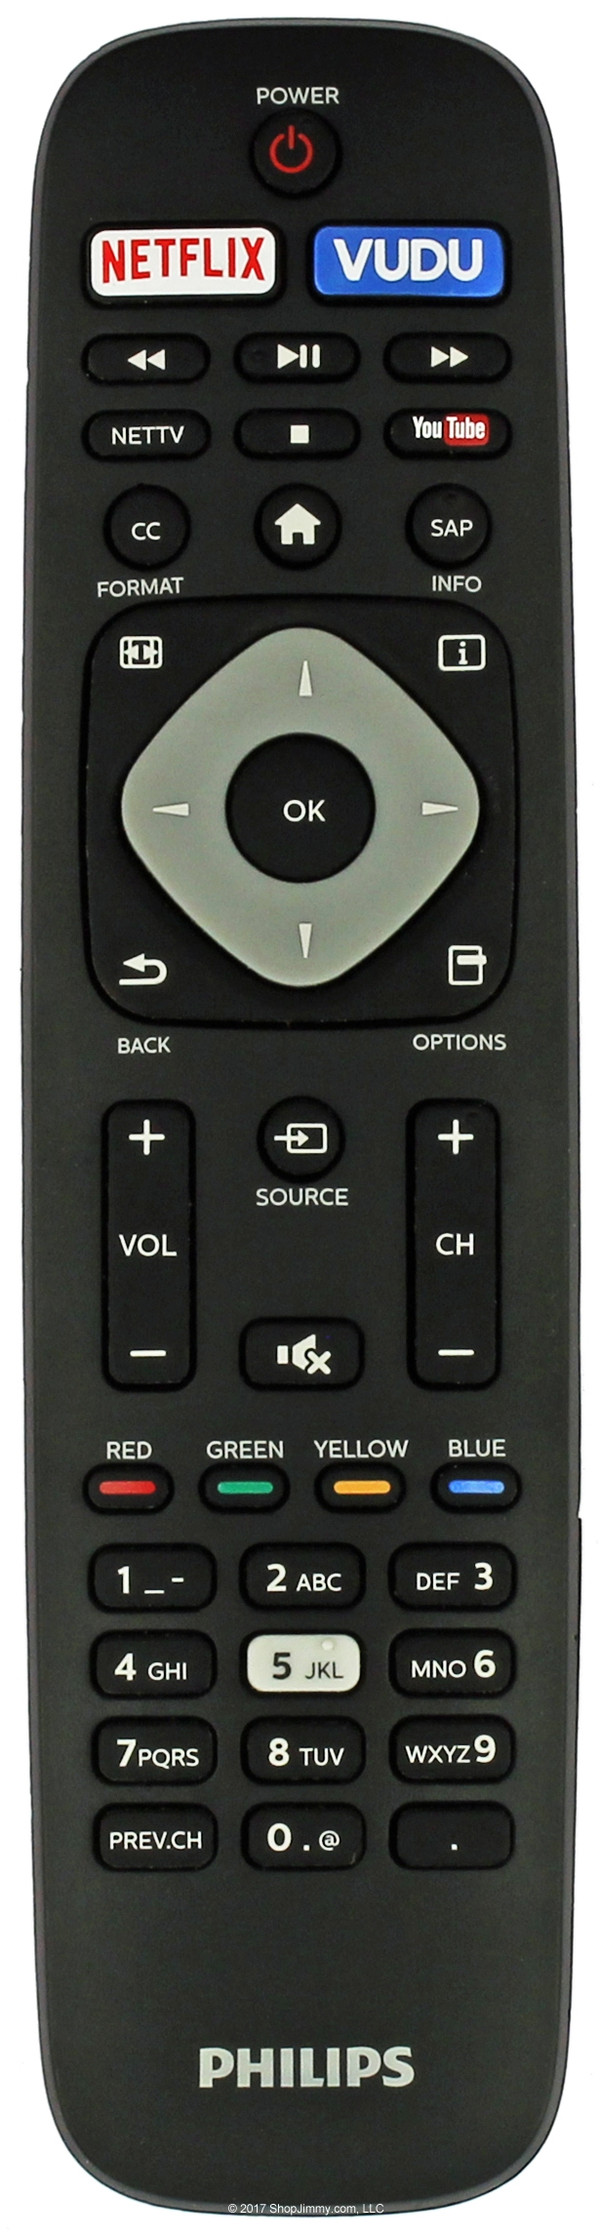 Philips NH500UP Remote Control--Open Bag